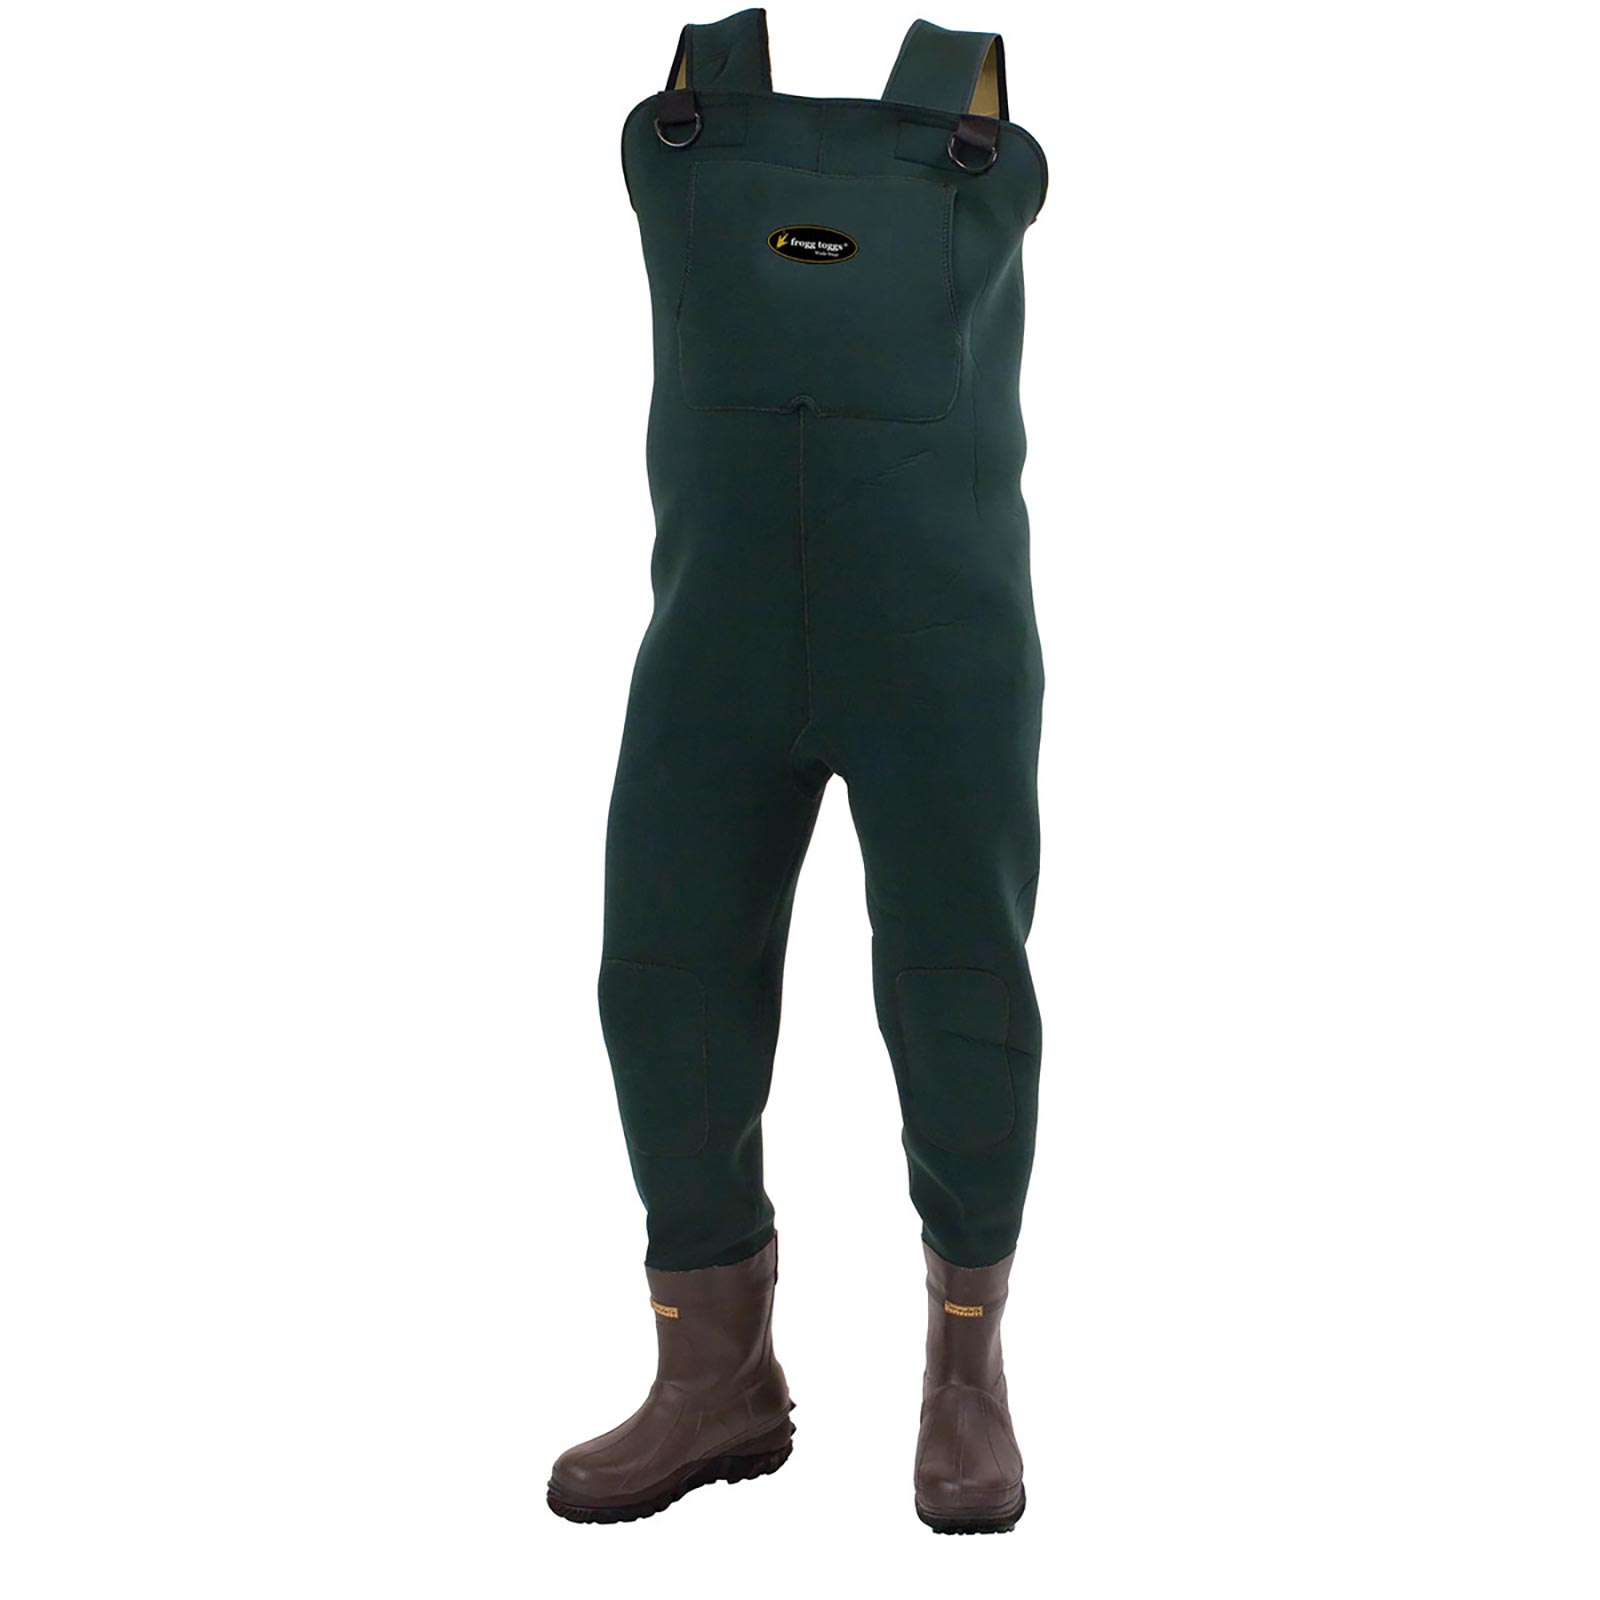 Frogg Toggs Amphib Btft Neoprene Chest Wader Cleated Green - 8